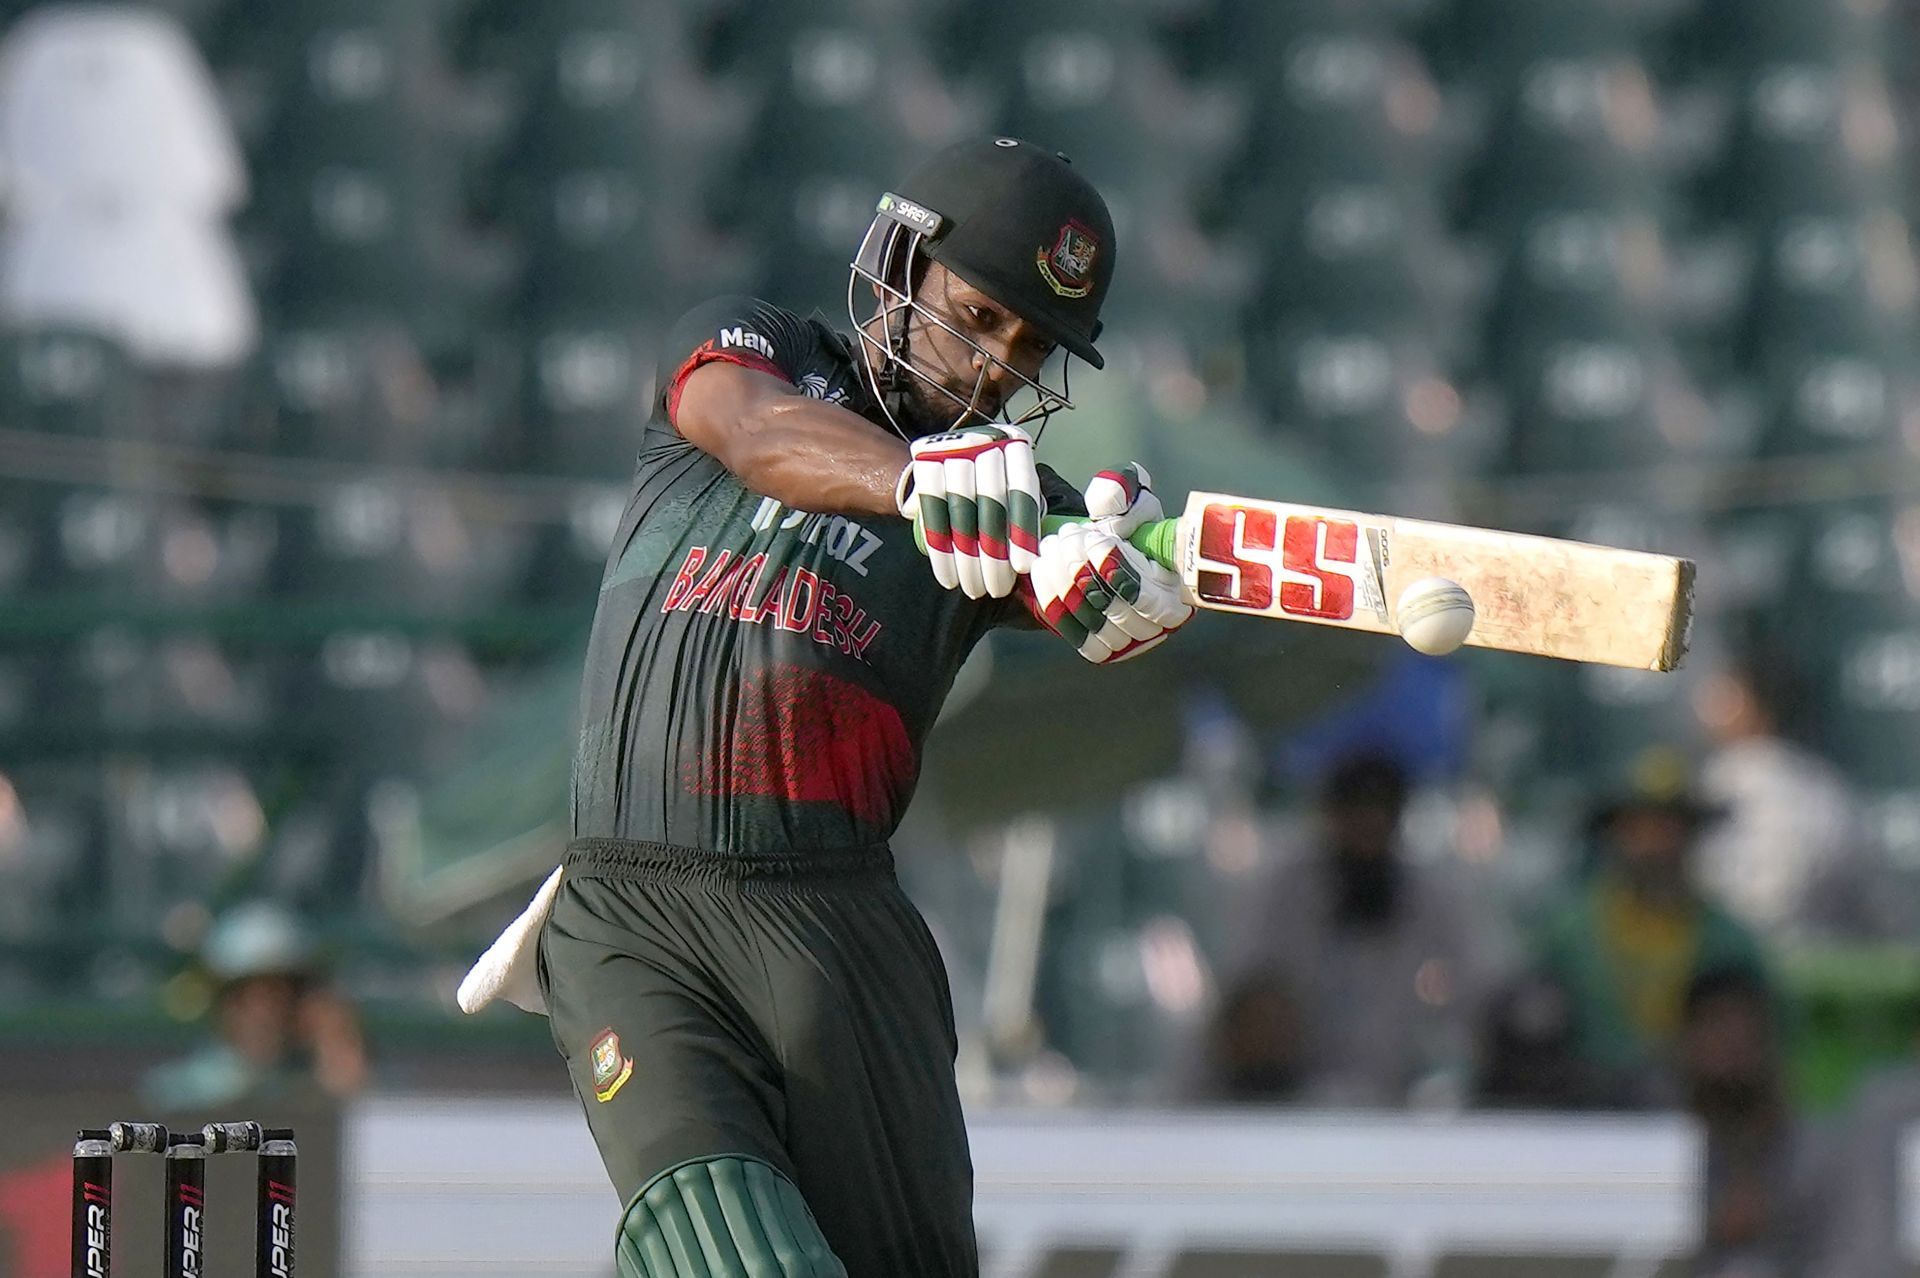 Najmul Hossain Shanto hit nine fours and two sixes during his innings. [P/C: AP]